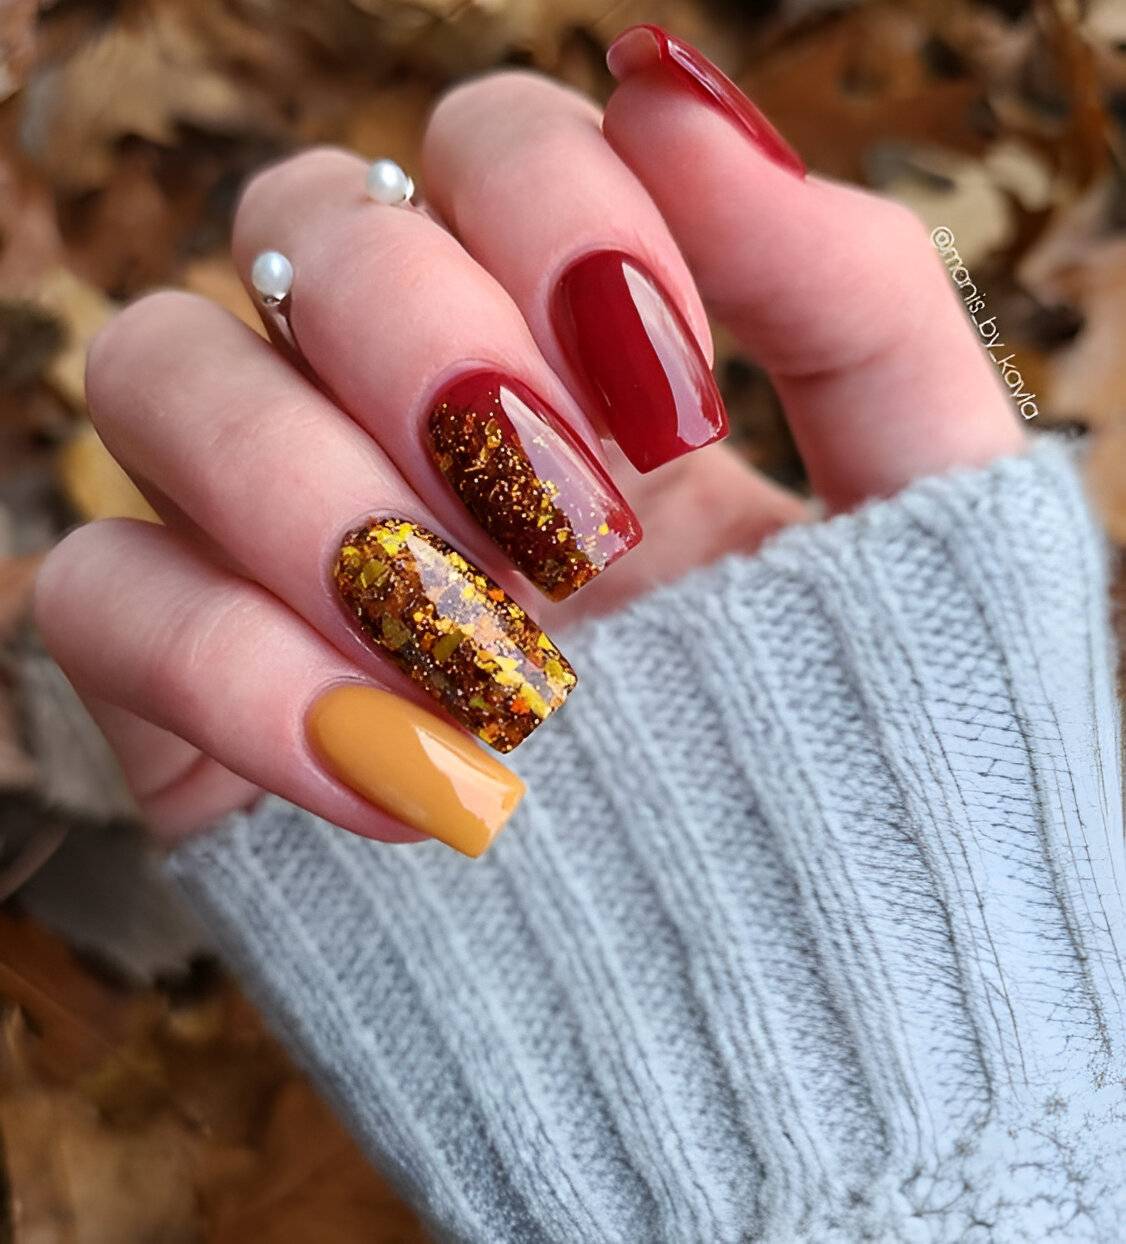 30 Autumn Nail Designs Too Chic To Resist - 197